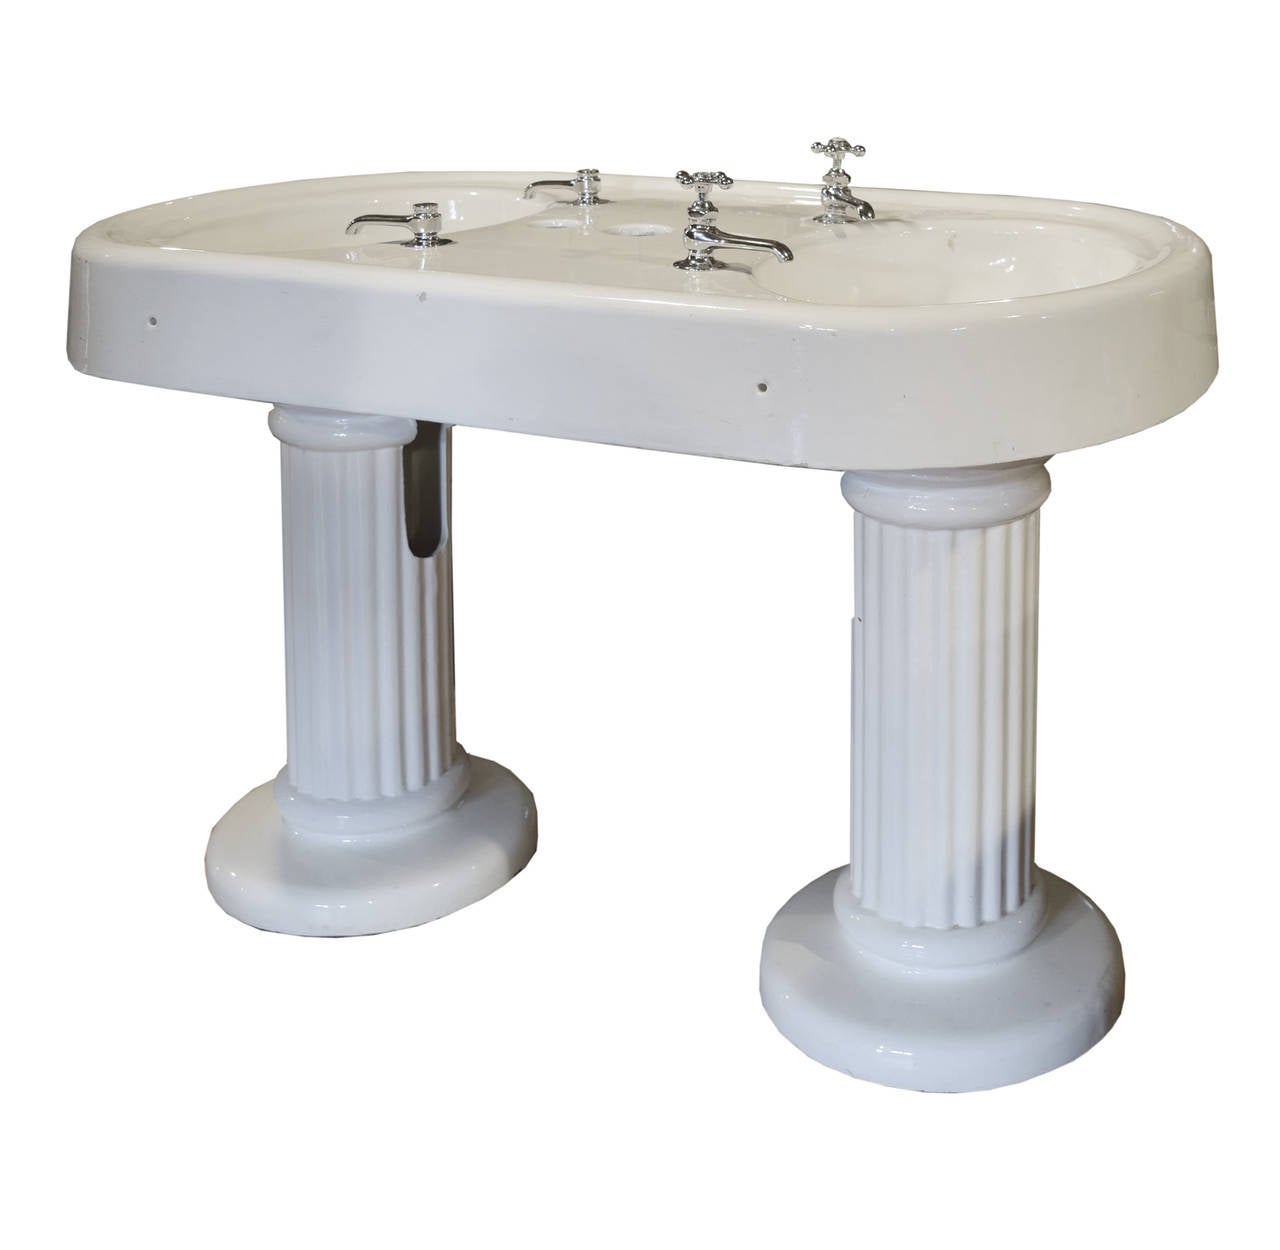 An early 20th century double-sided barber’s sink. This pedestal sink has been re-glazed in porcelain and has new fixtures.